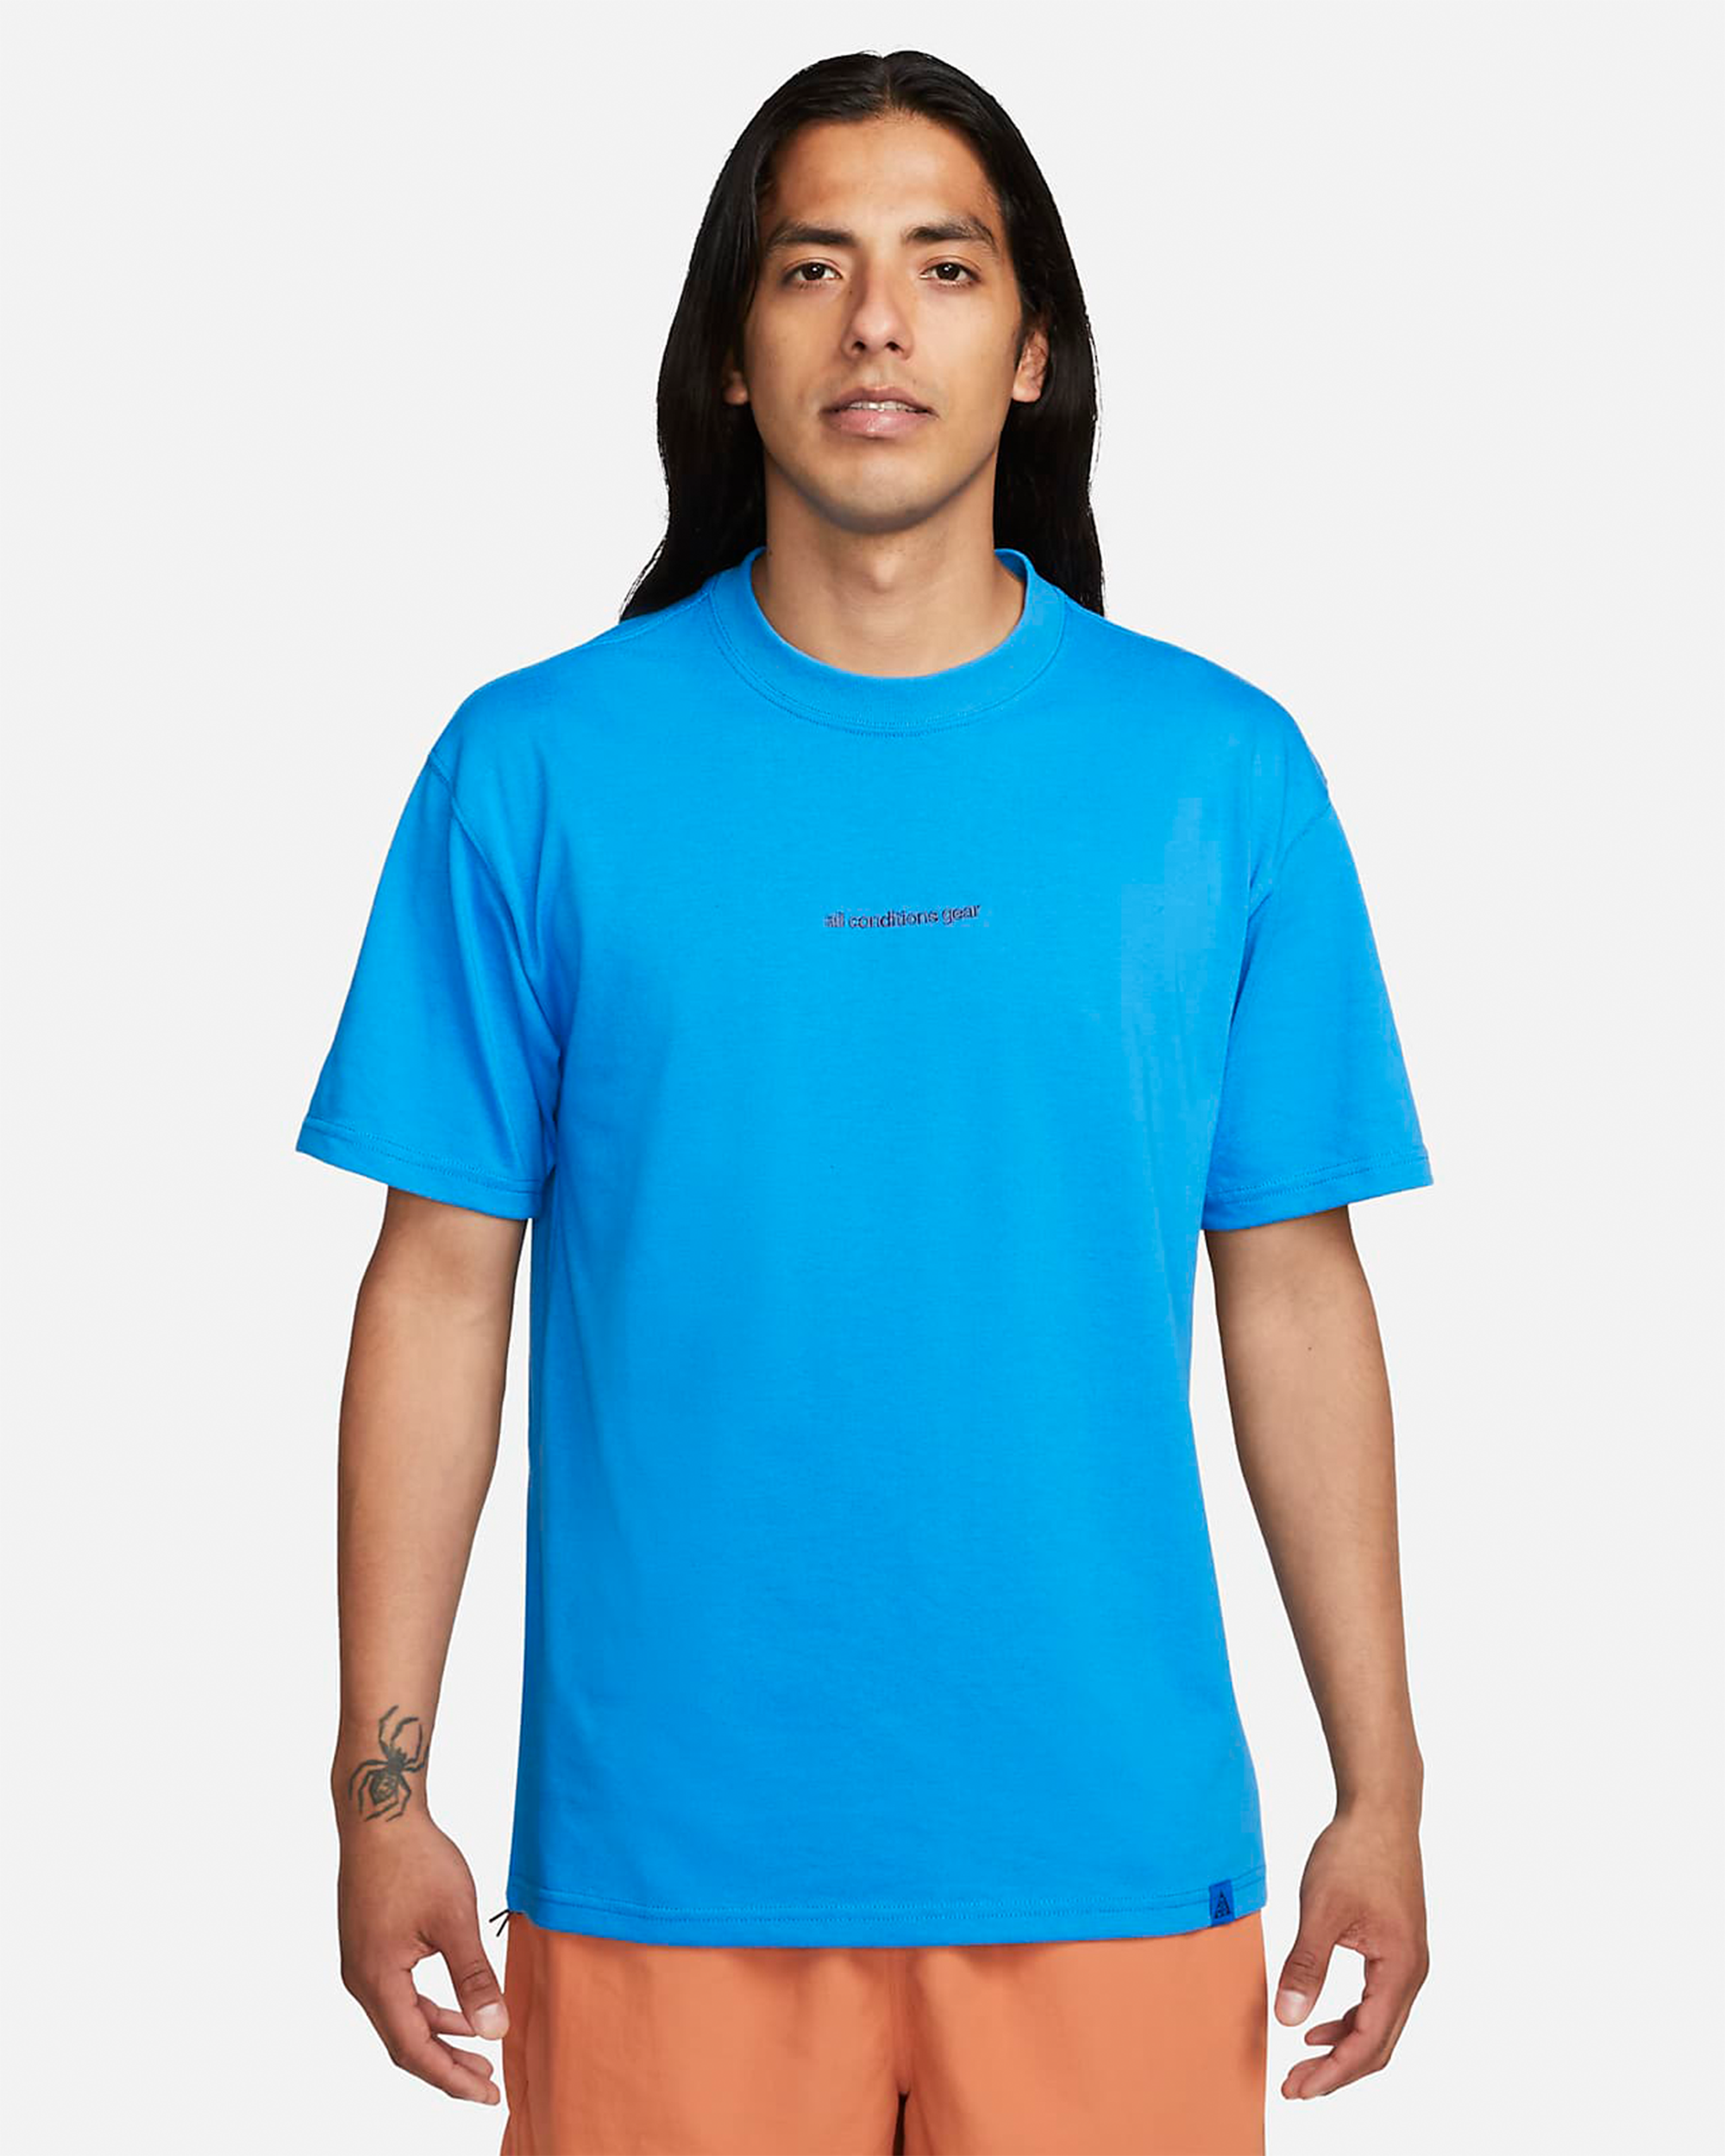 All Conditions T-shirt - Light Photo Blue